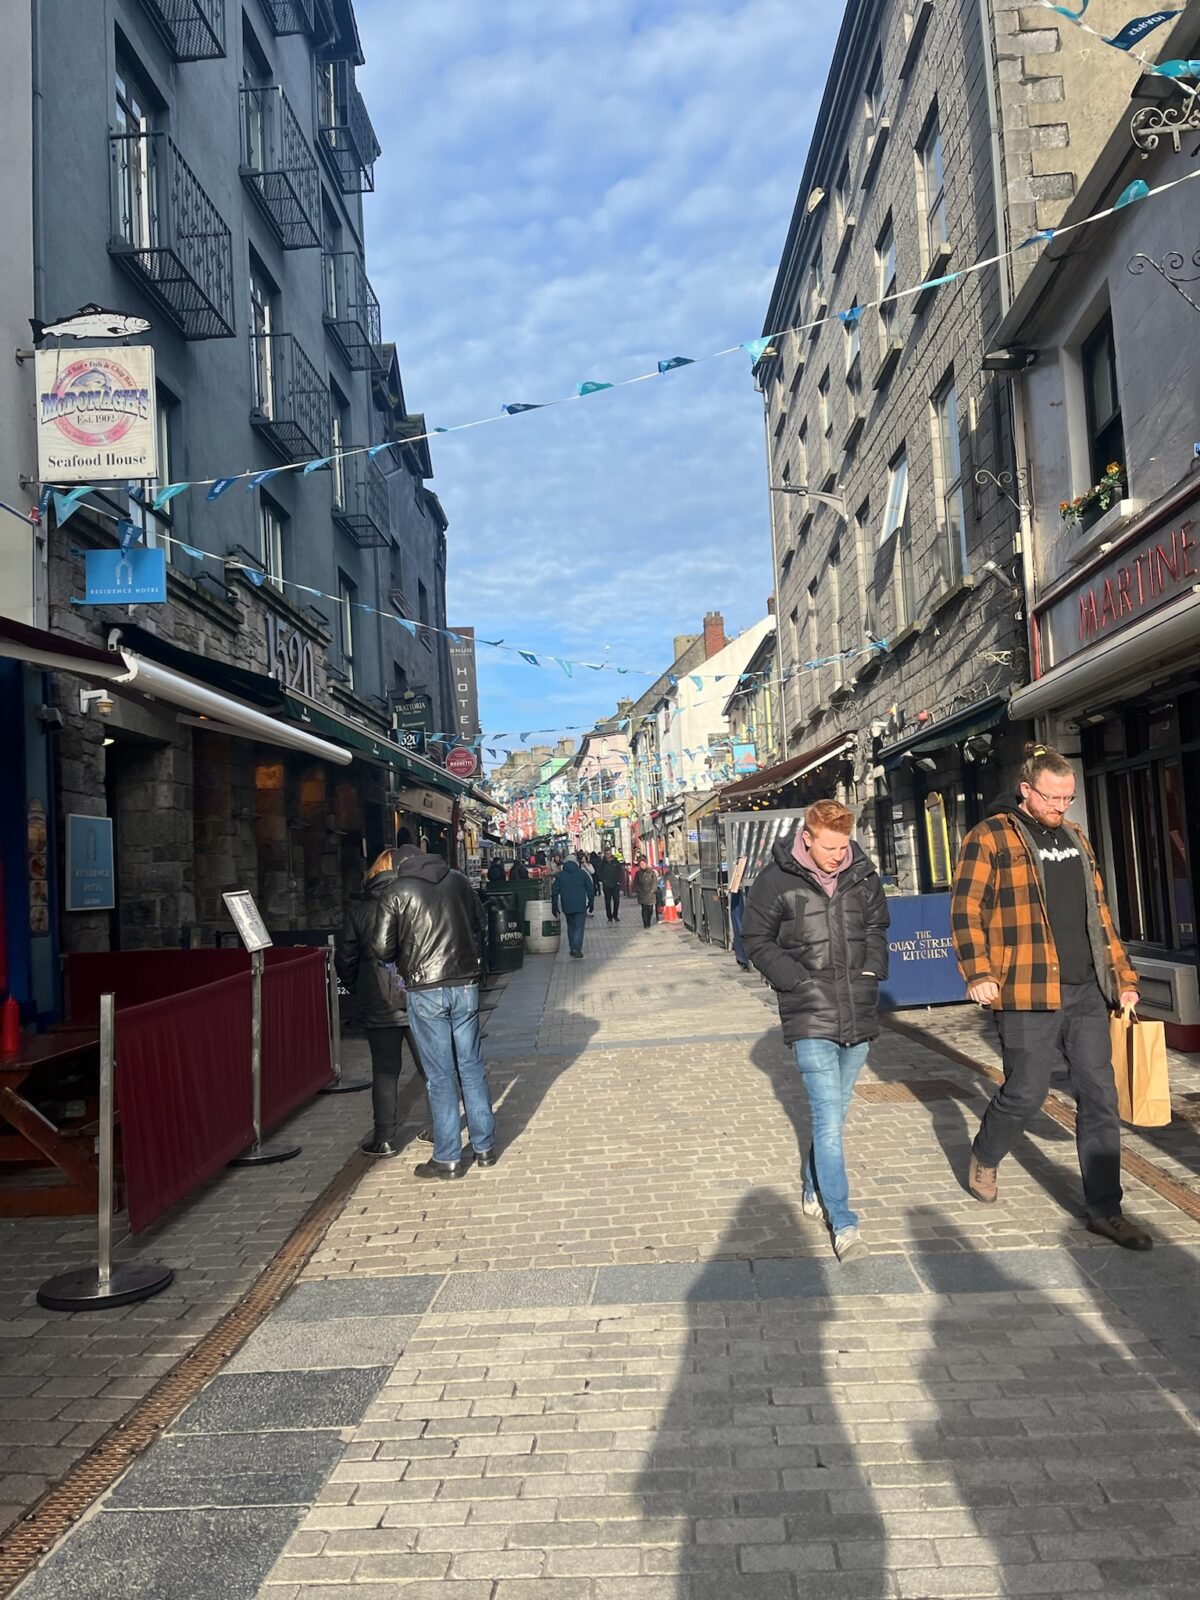 City streets of Galway, Ireland with people walking around the shops and stores